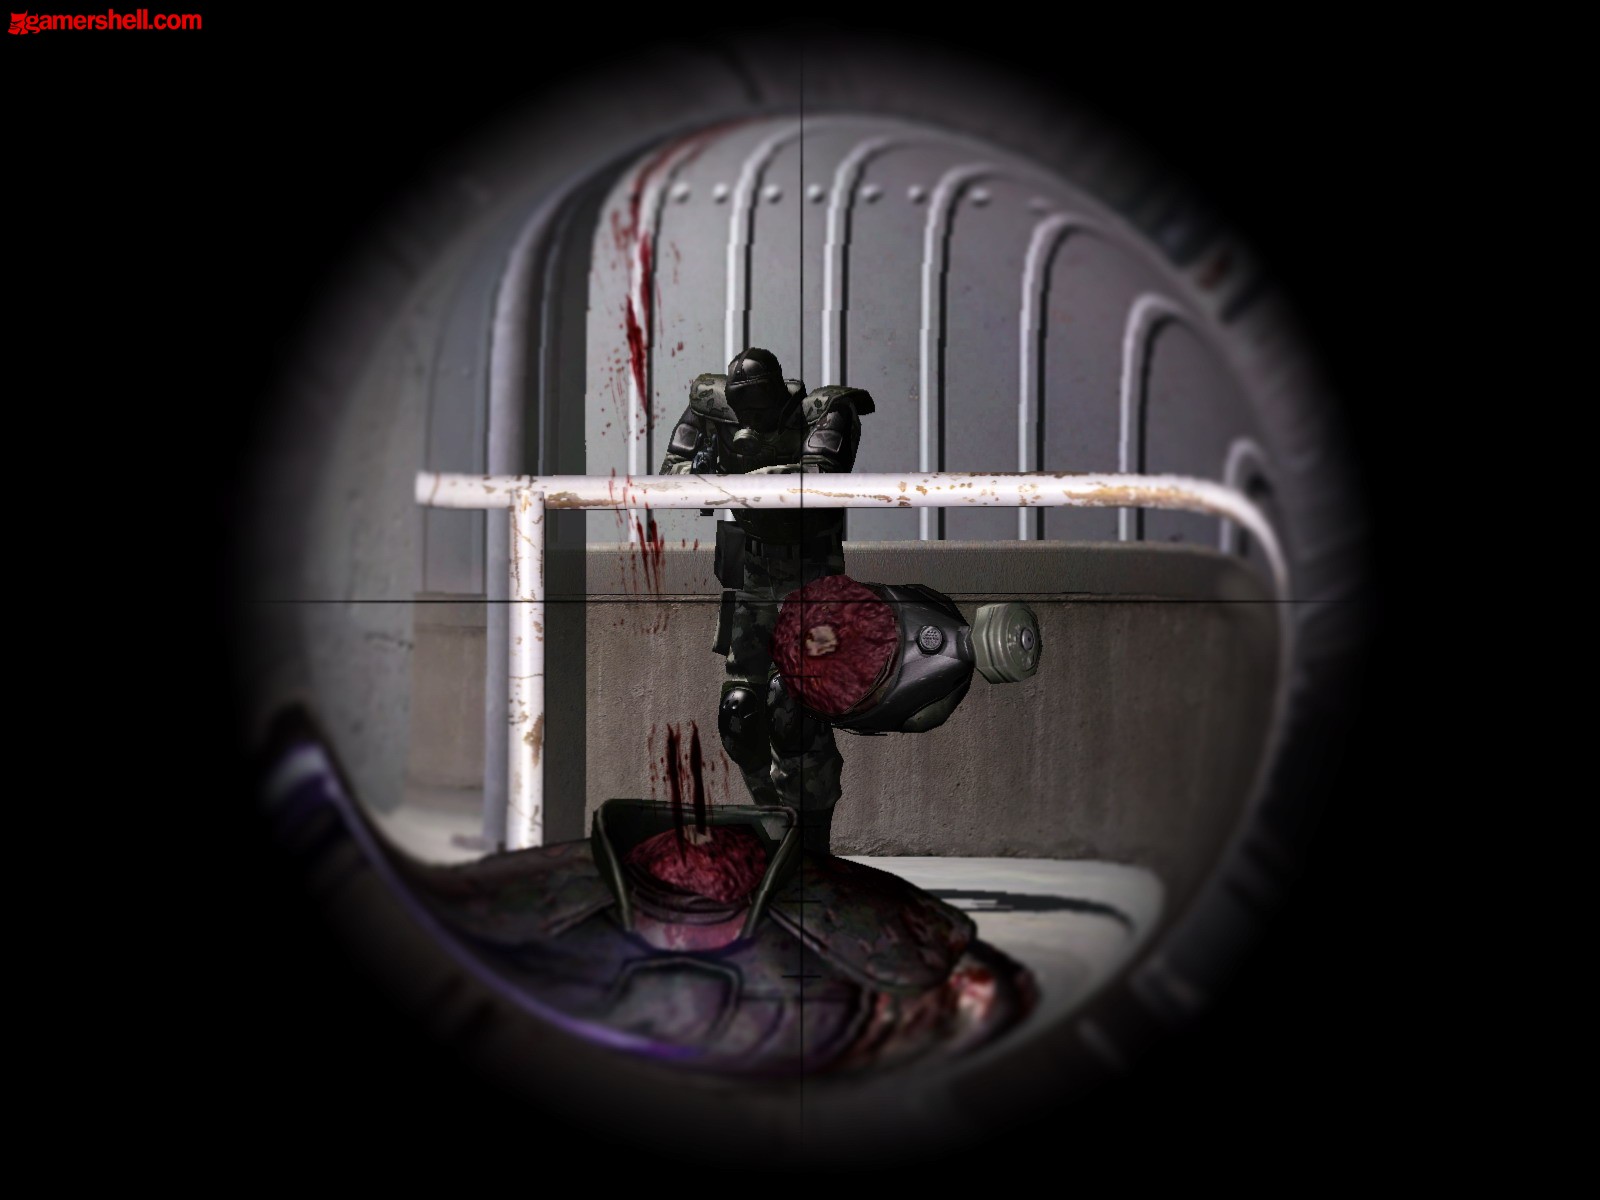 F.E.A.R. sniper in dark surroundings, wearing a bloodied mask; a soldier ready for action.